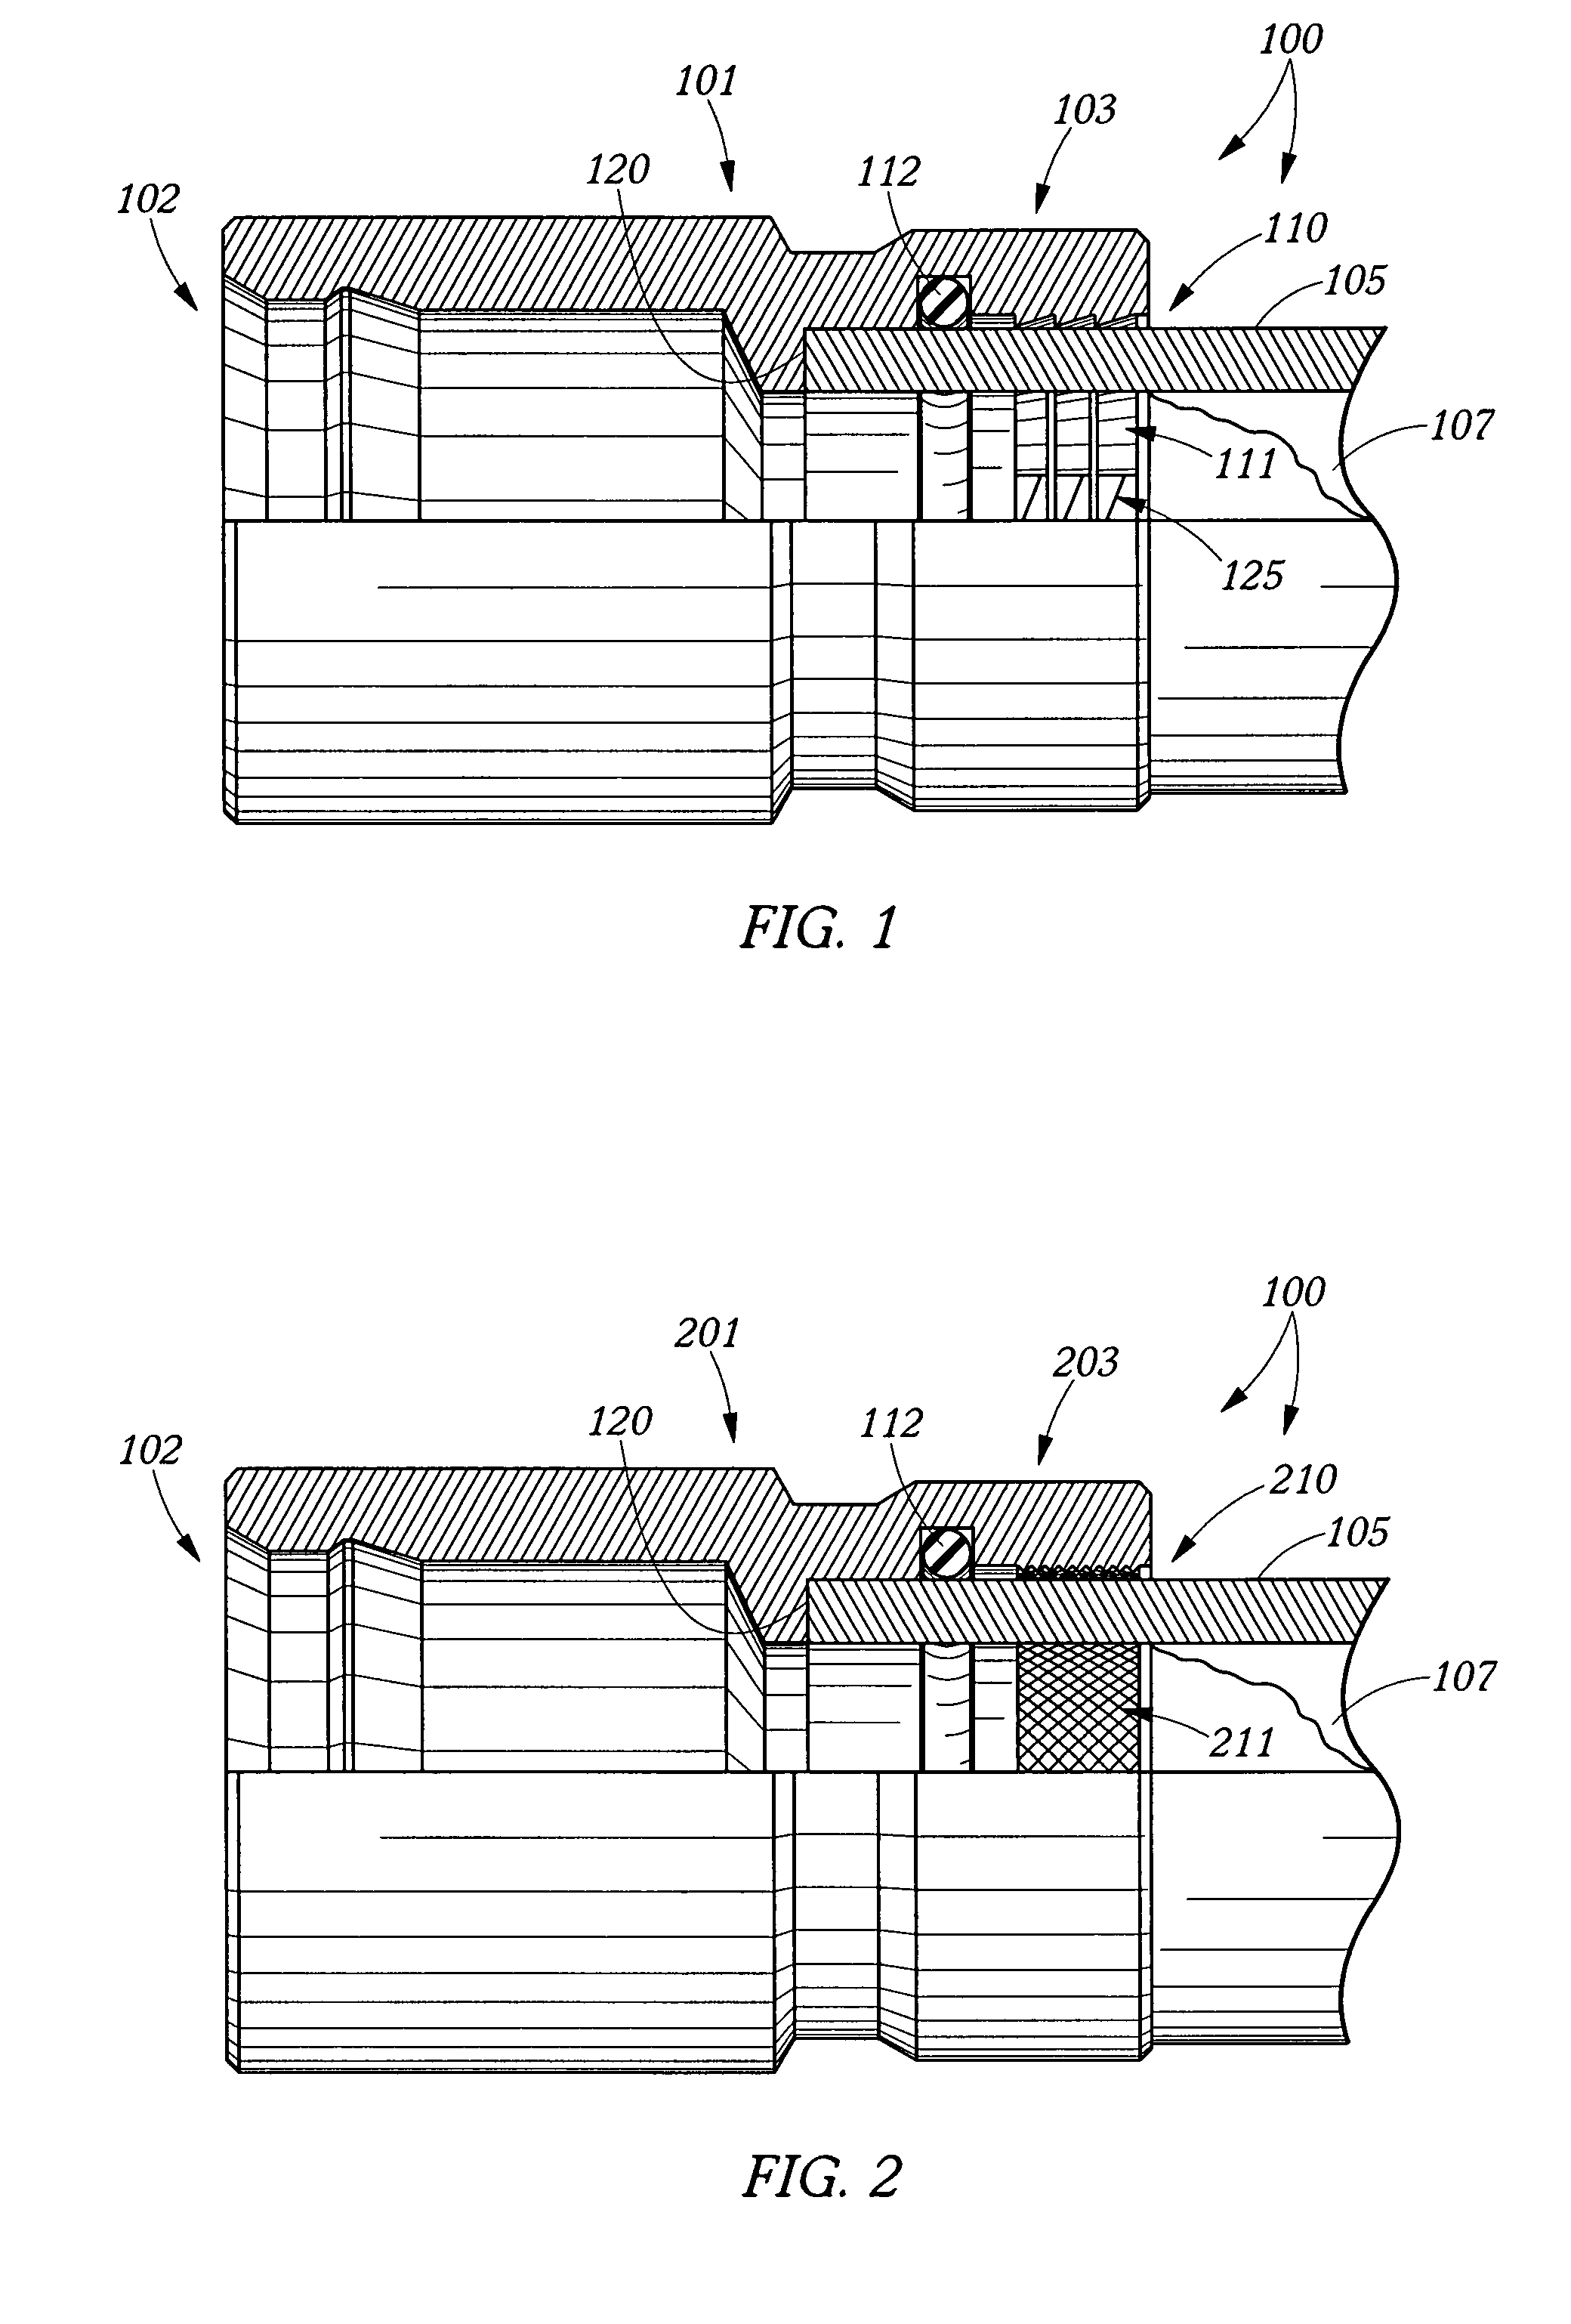 Crimped/swaged-on tubing terminations and methods